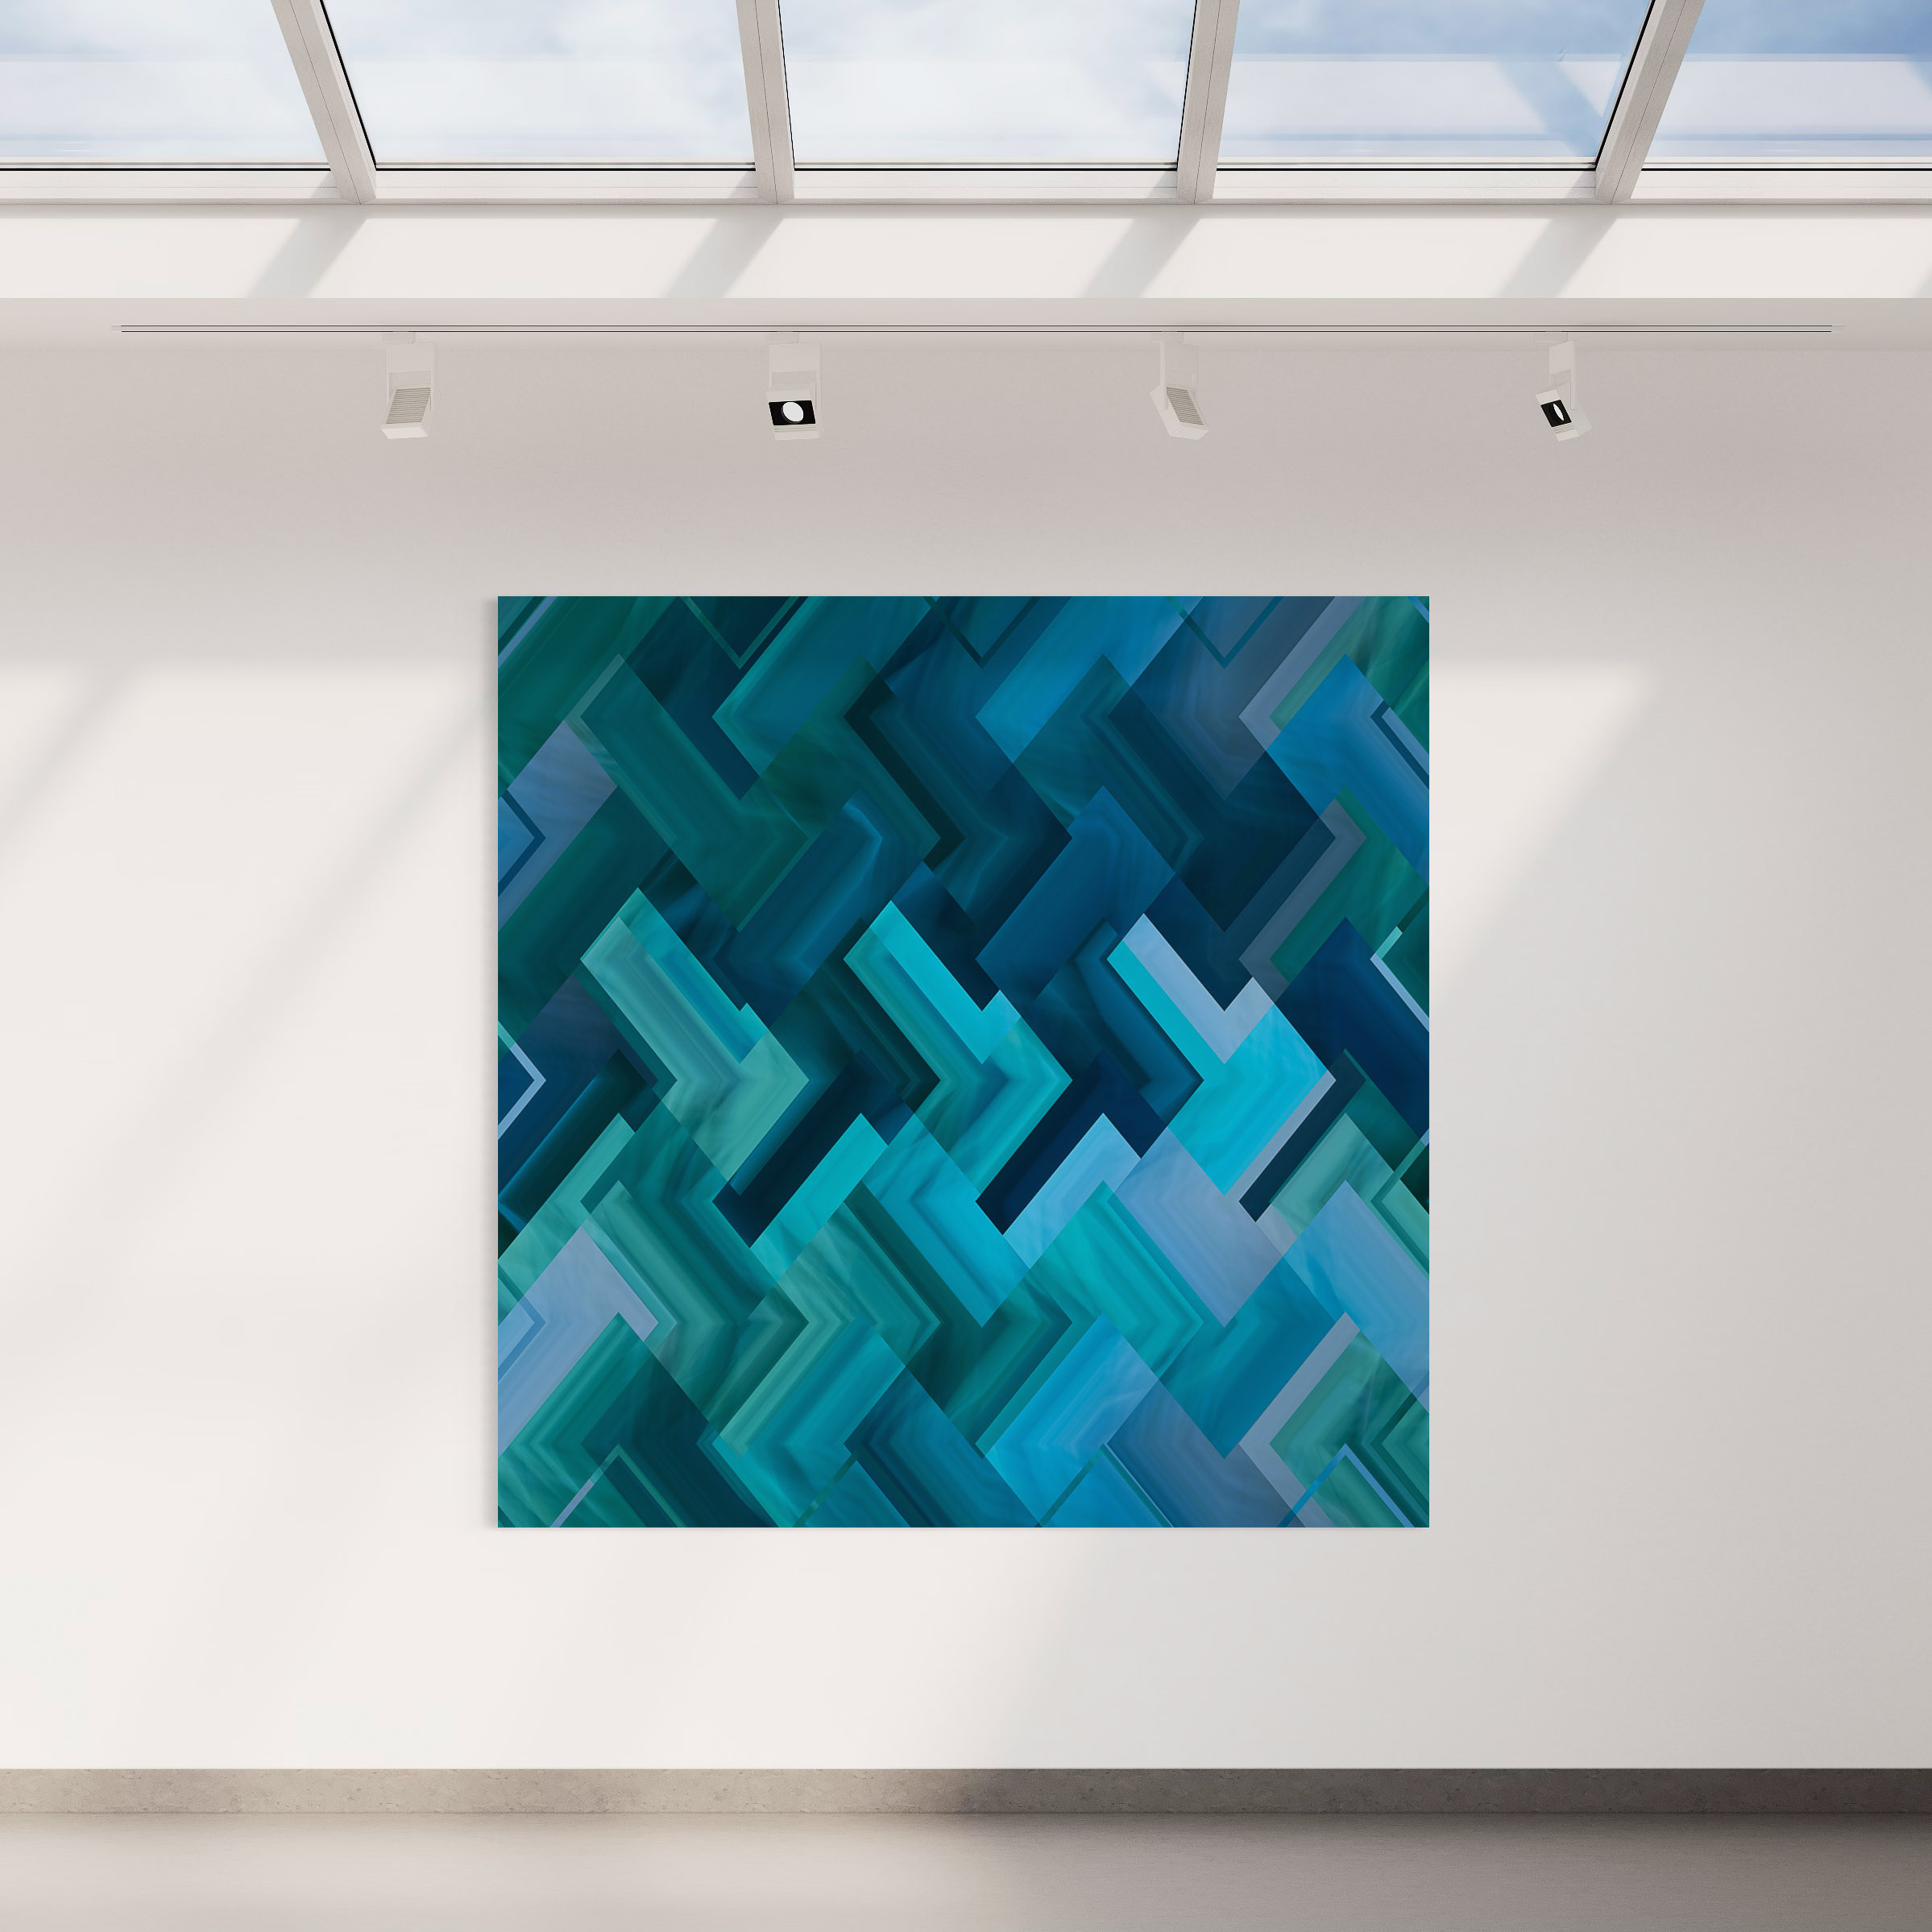 A large painting of blue squares on the wall